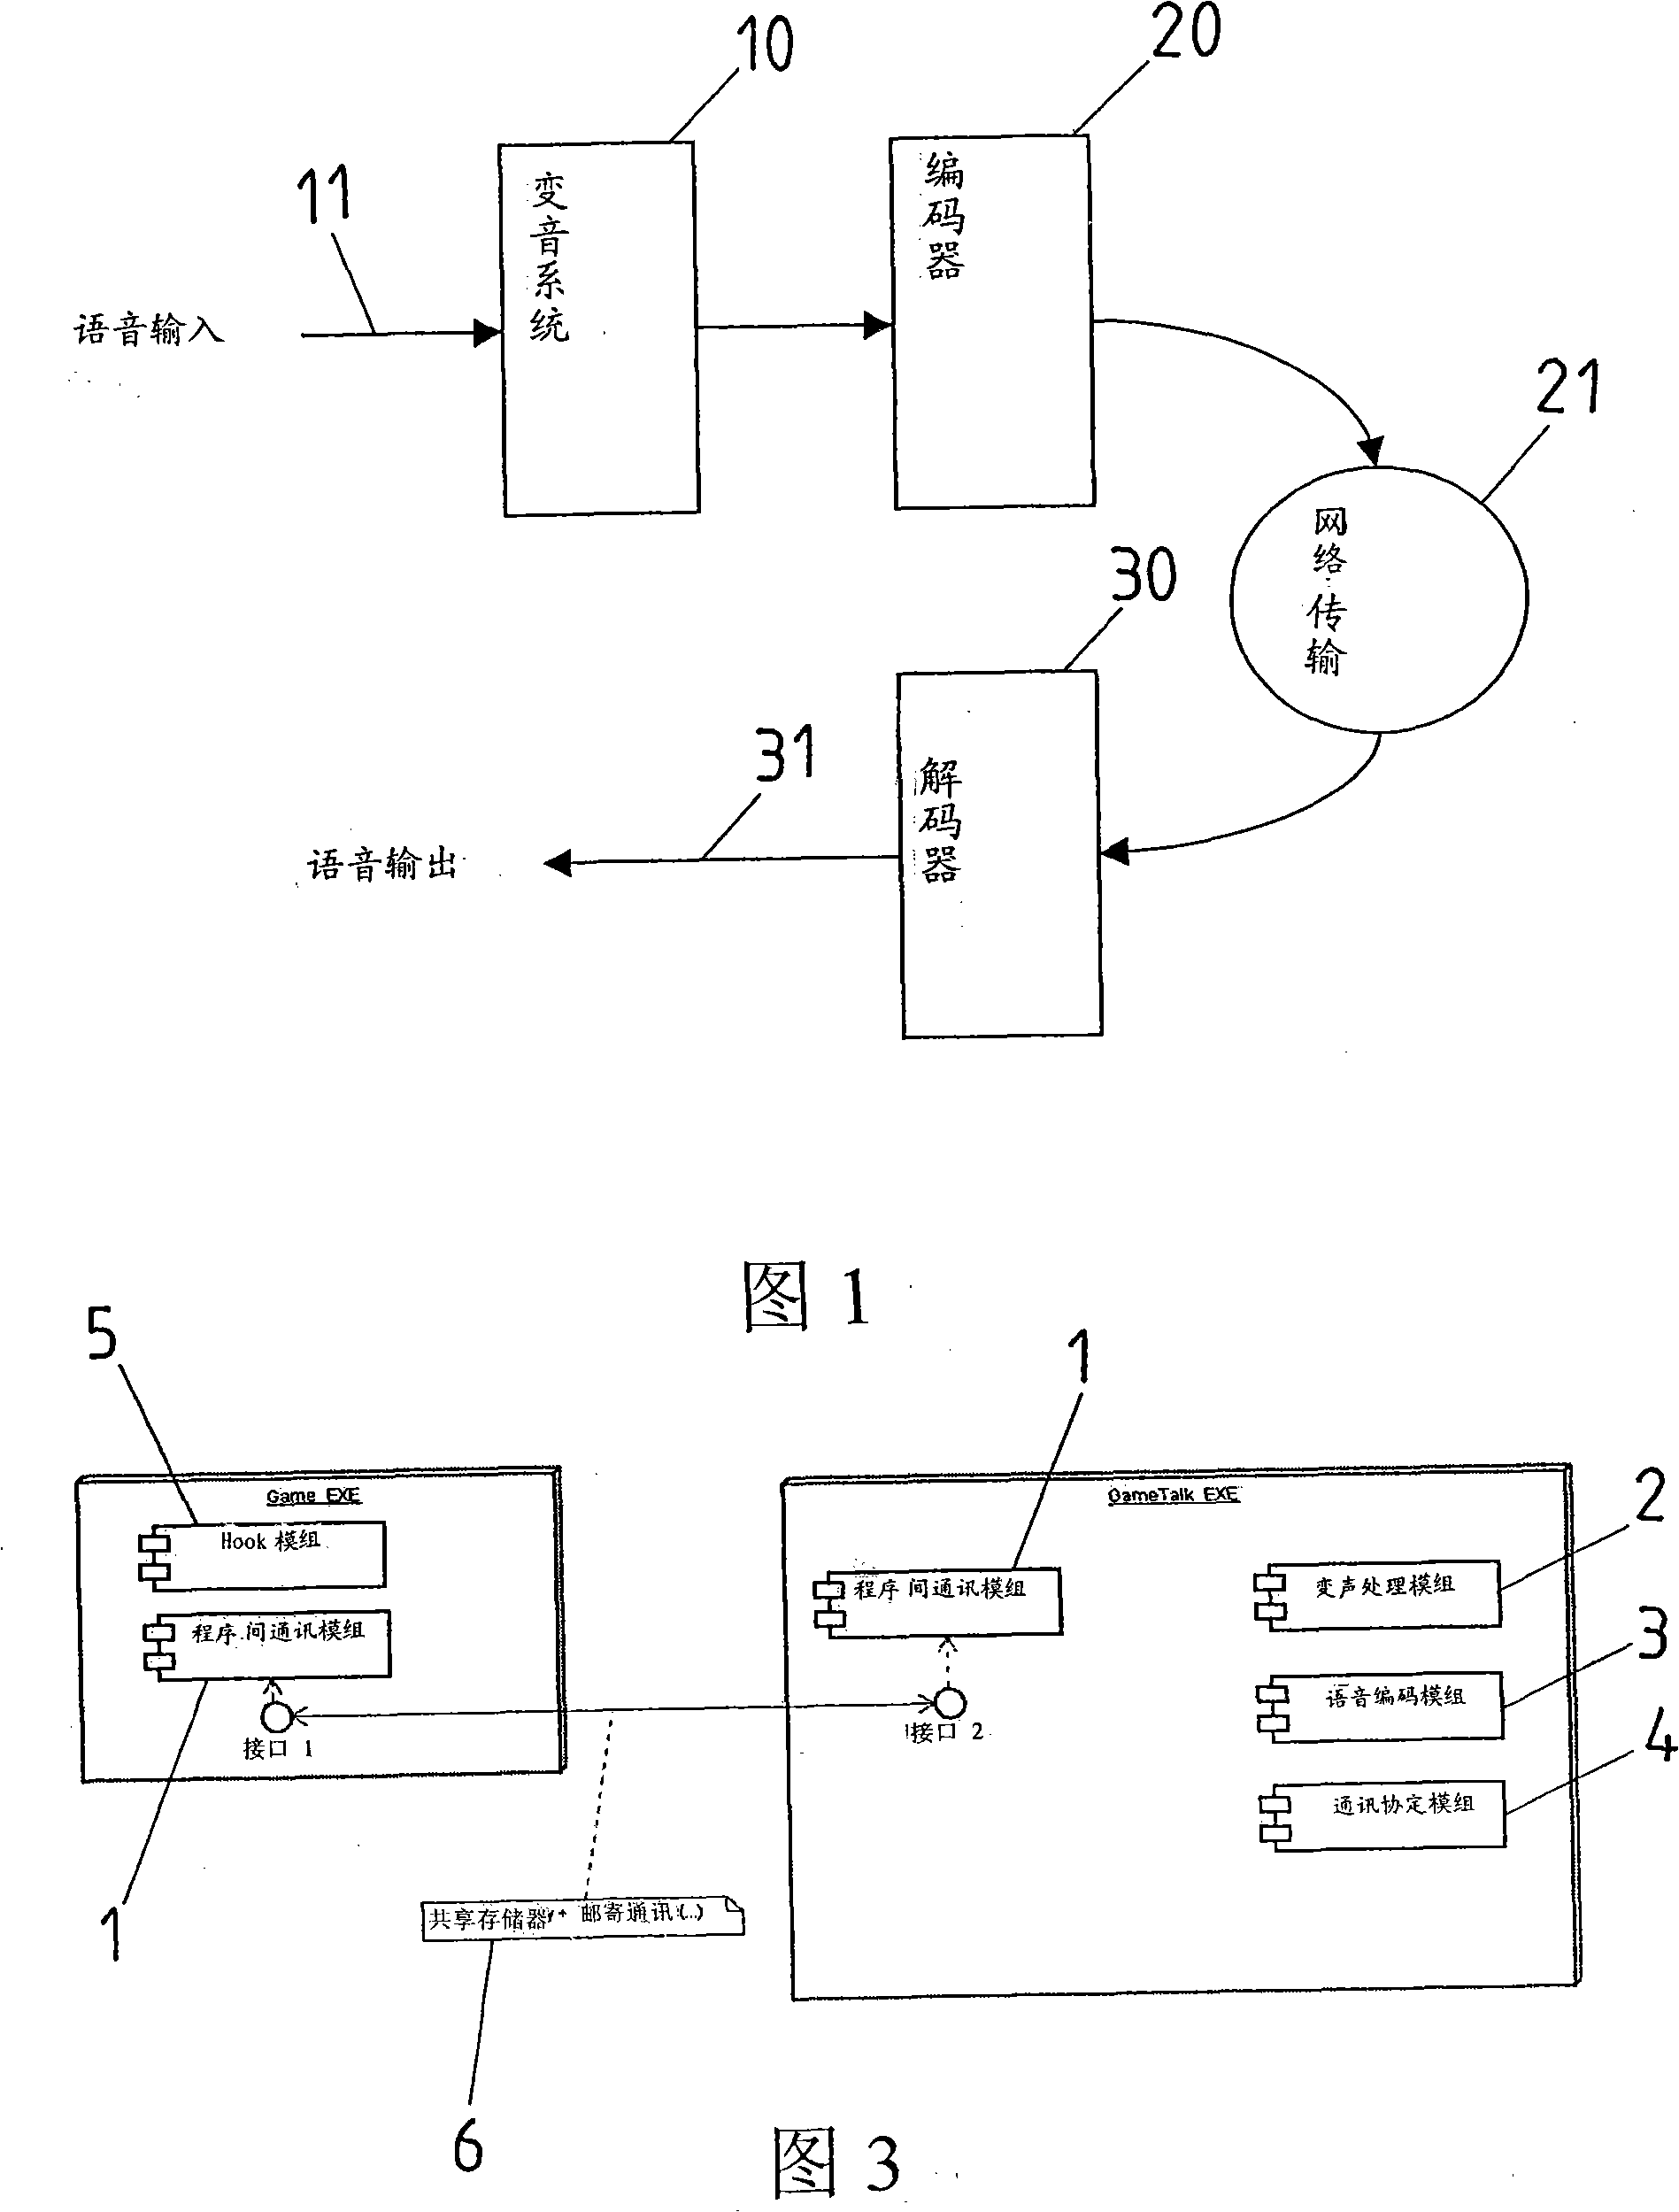 Method for integrated application of sound changing system and network telephone